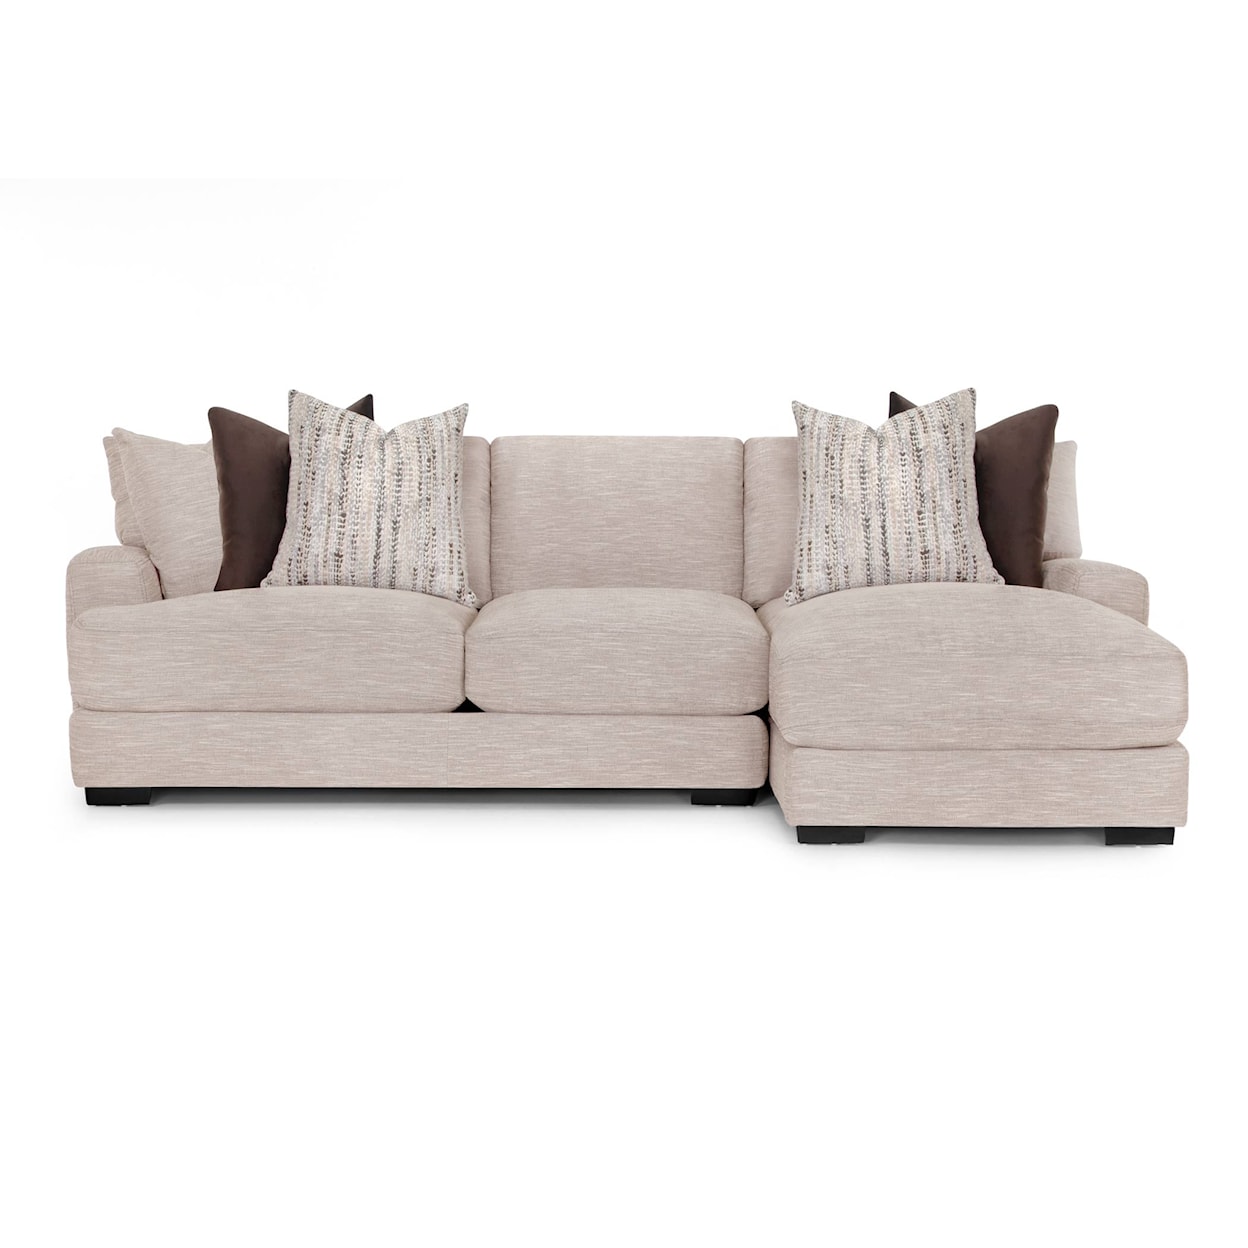 Franklin 808 Hannigan Sectional Chaise Sofa